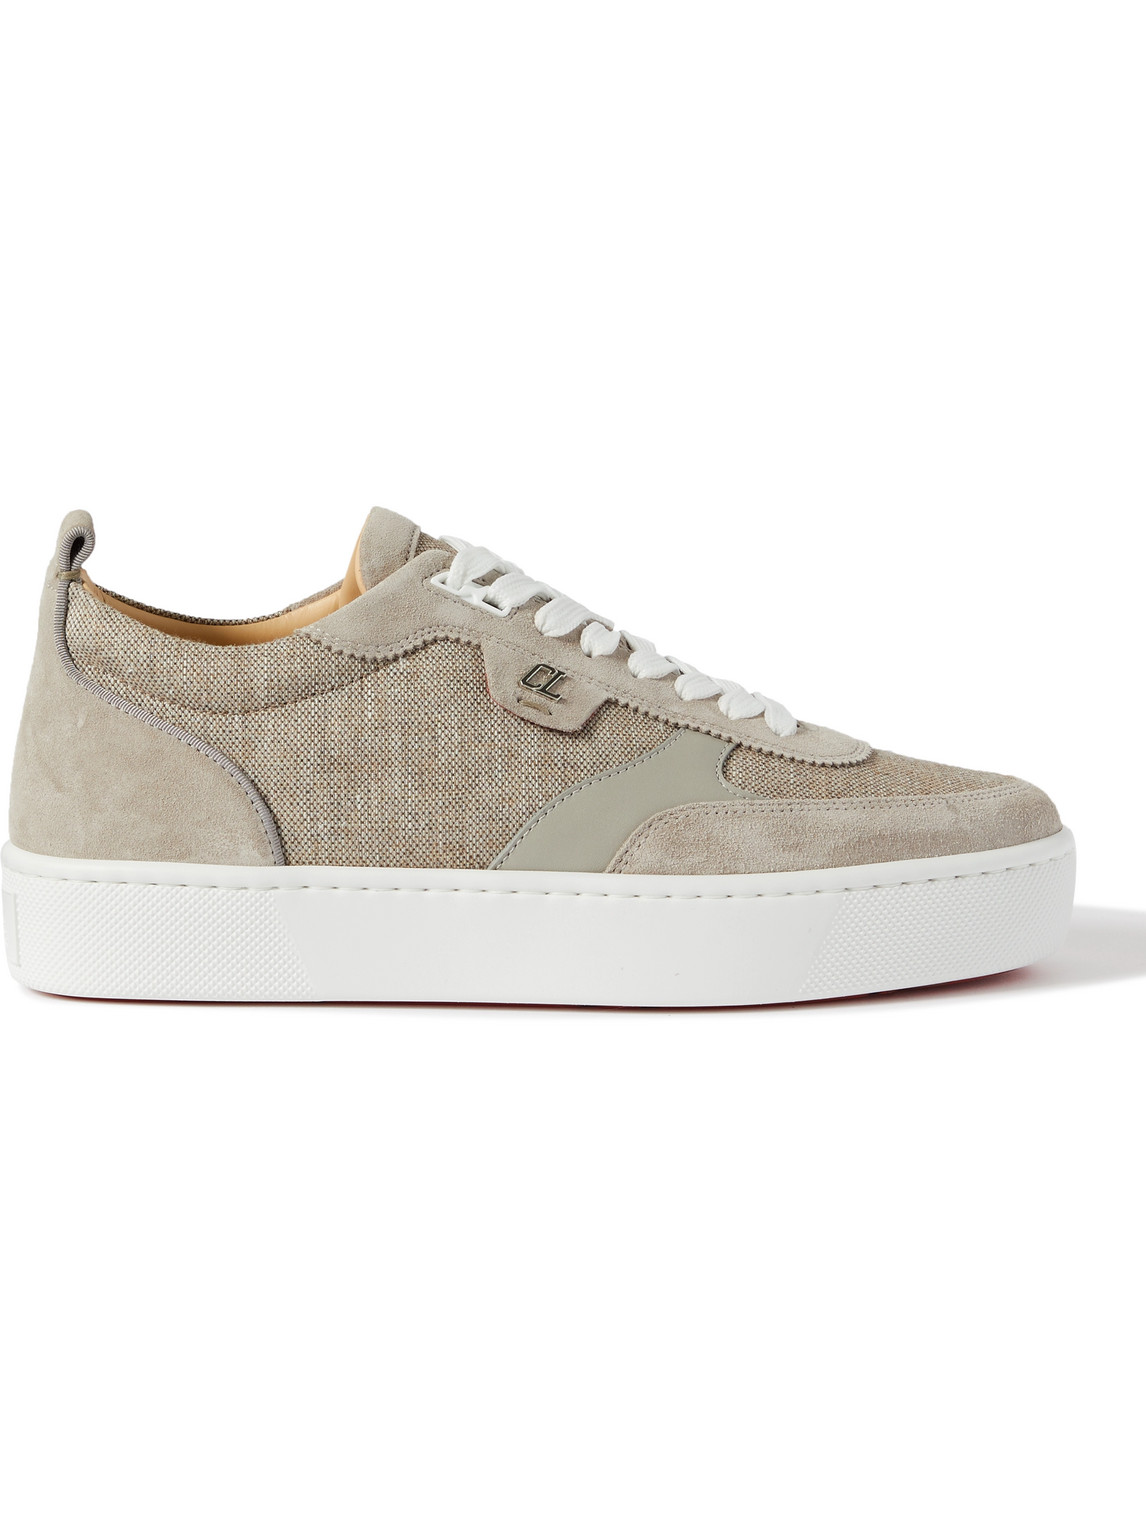 Happyrui Suede and Leather-Trimmed Canvas Sneakers